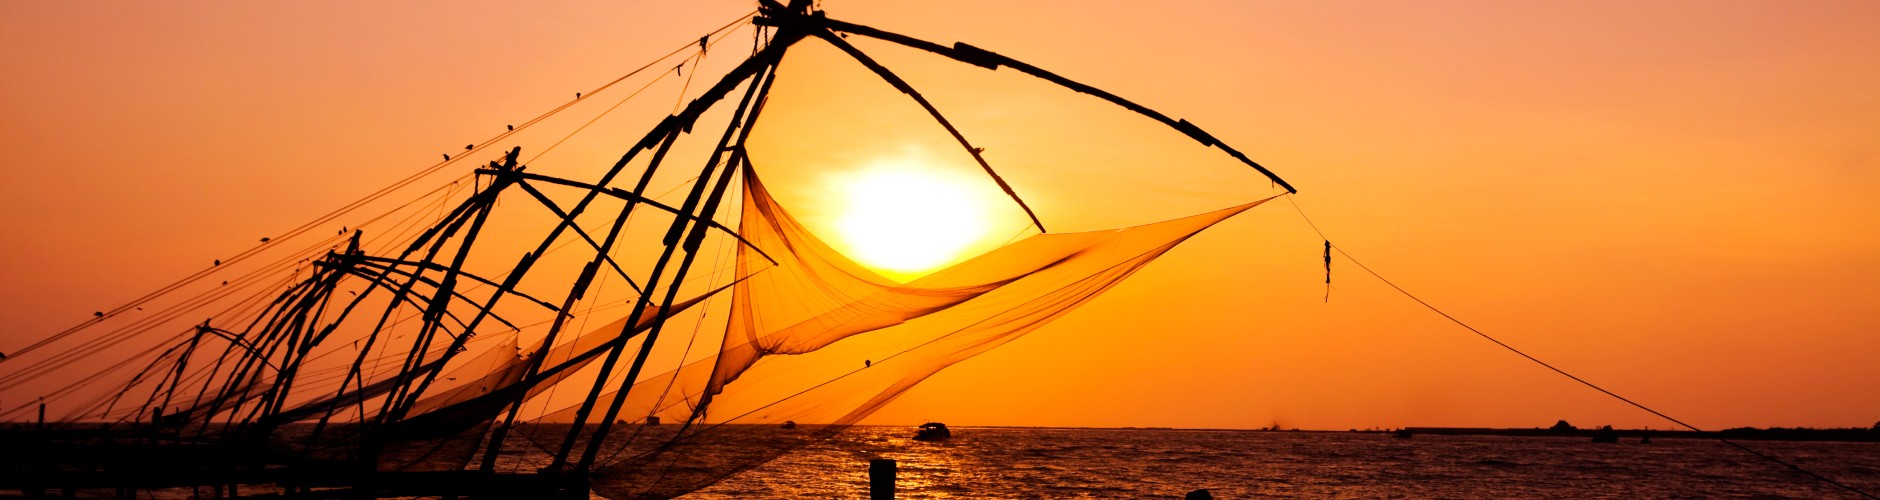 Picture of fishing net in backwaters